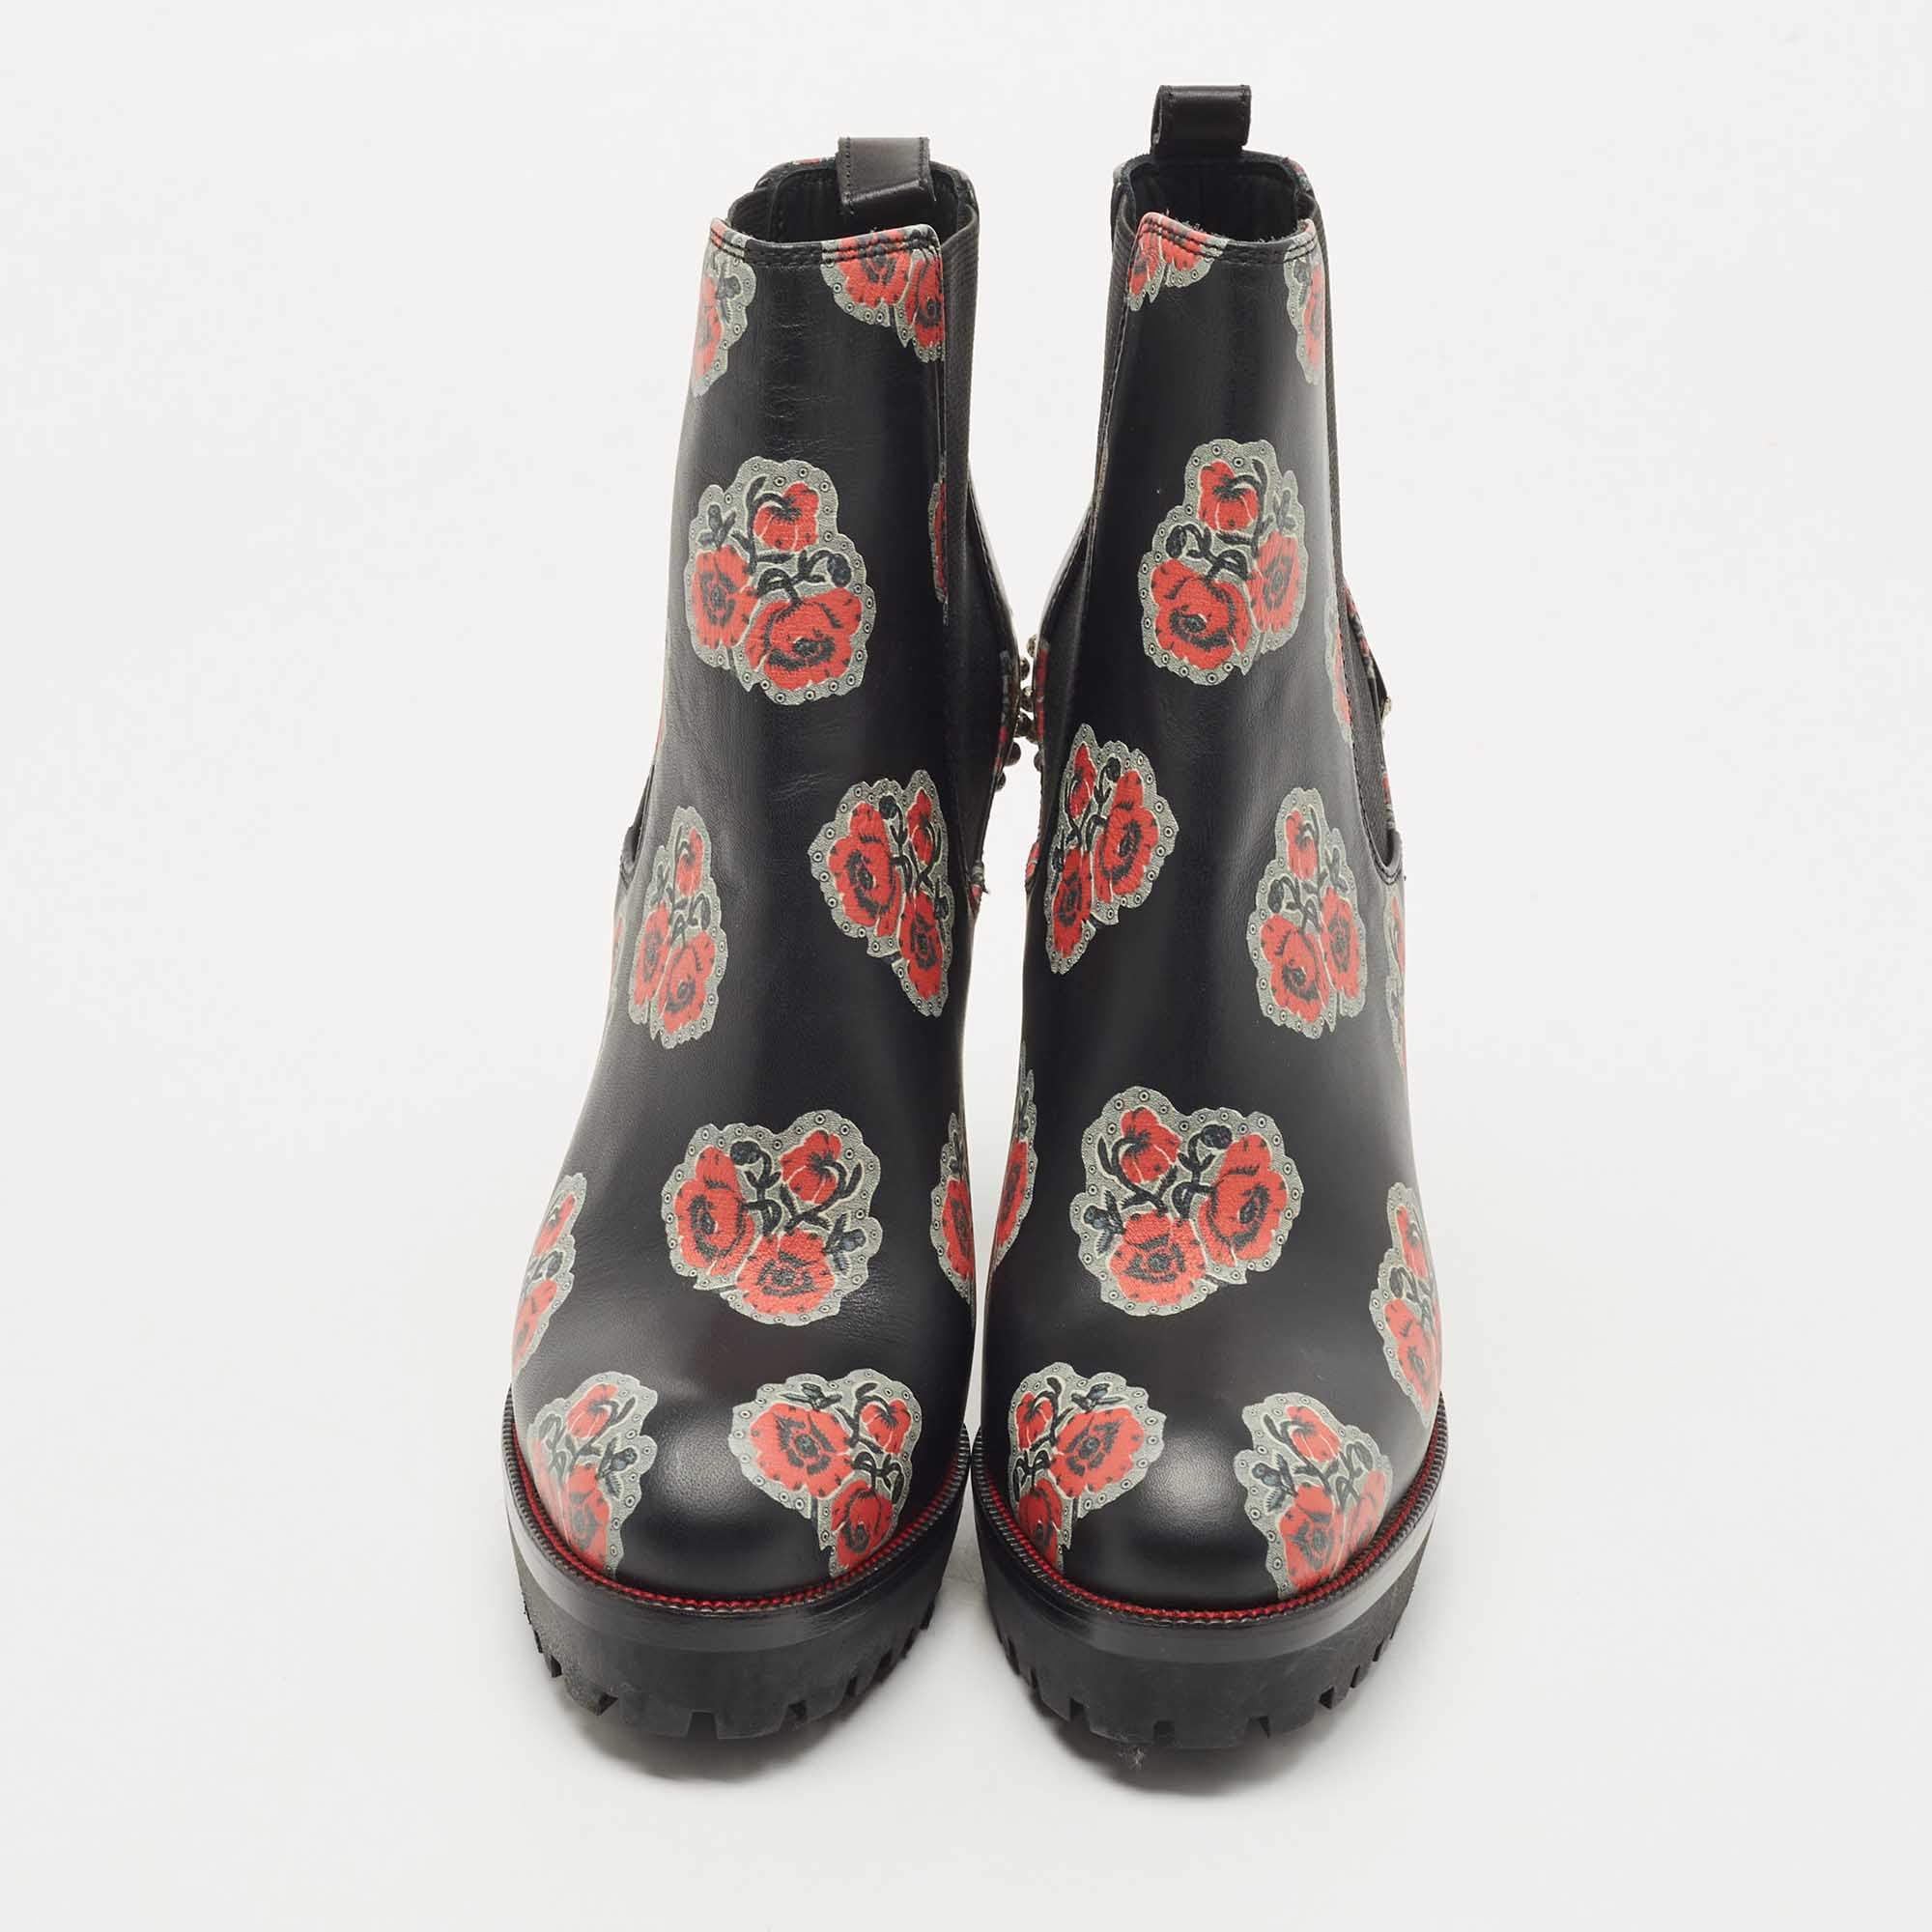 Alexander McQueen Black Floral Print Leather Chelsea Studded Heels Ankle  Boots Size 36 Alexander McQueen